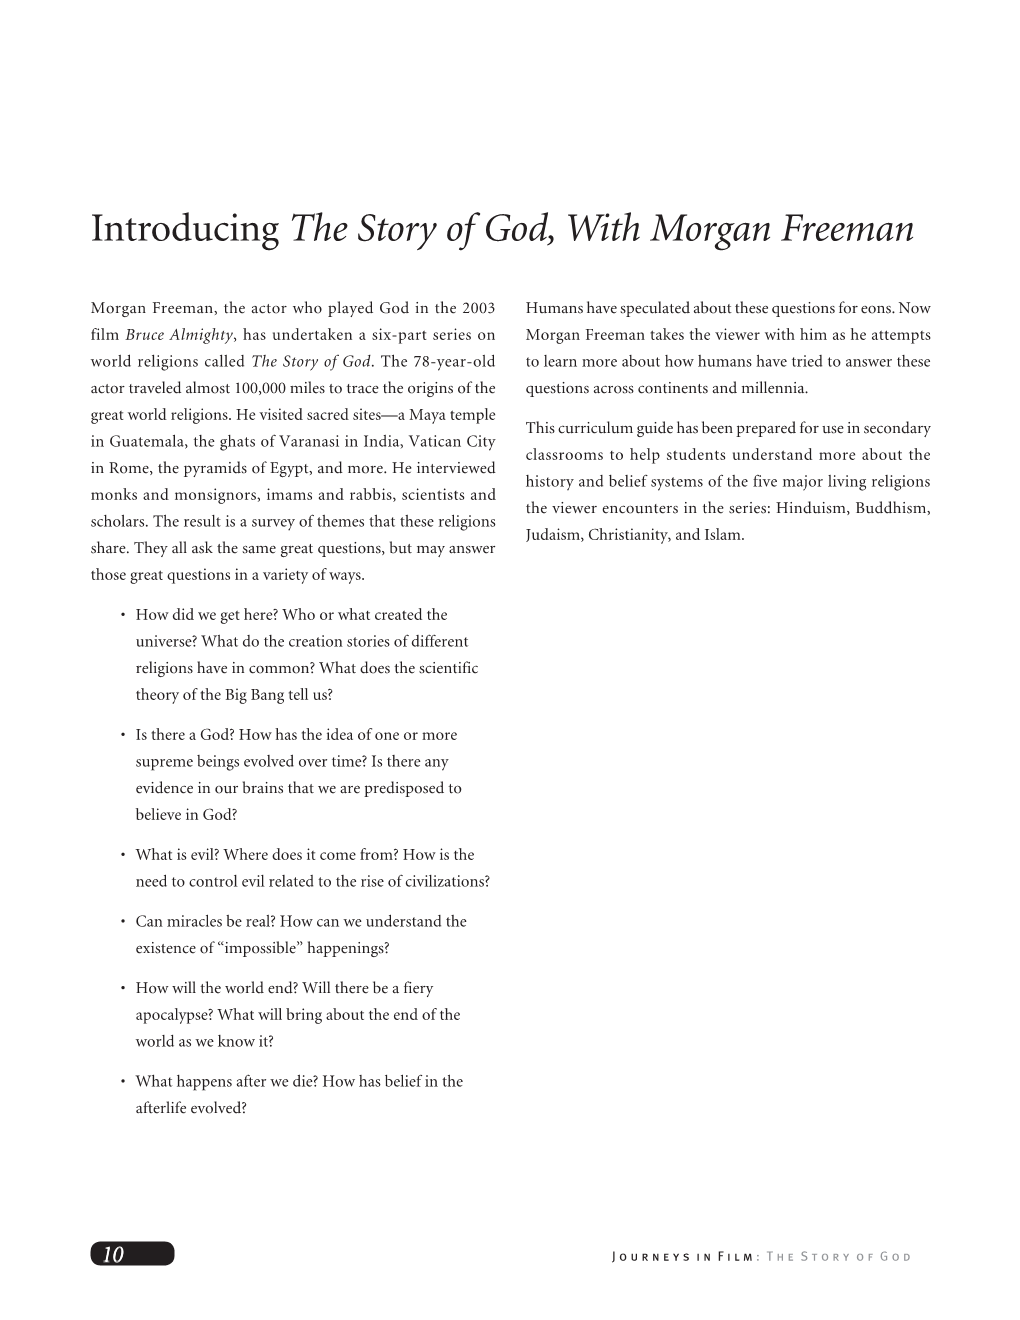 Introducing the Story of God, with Morgan Freeman